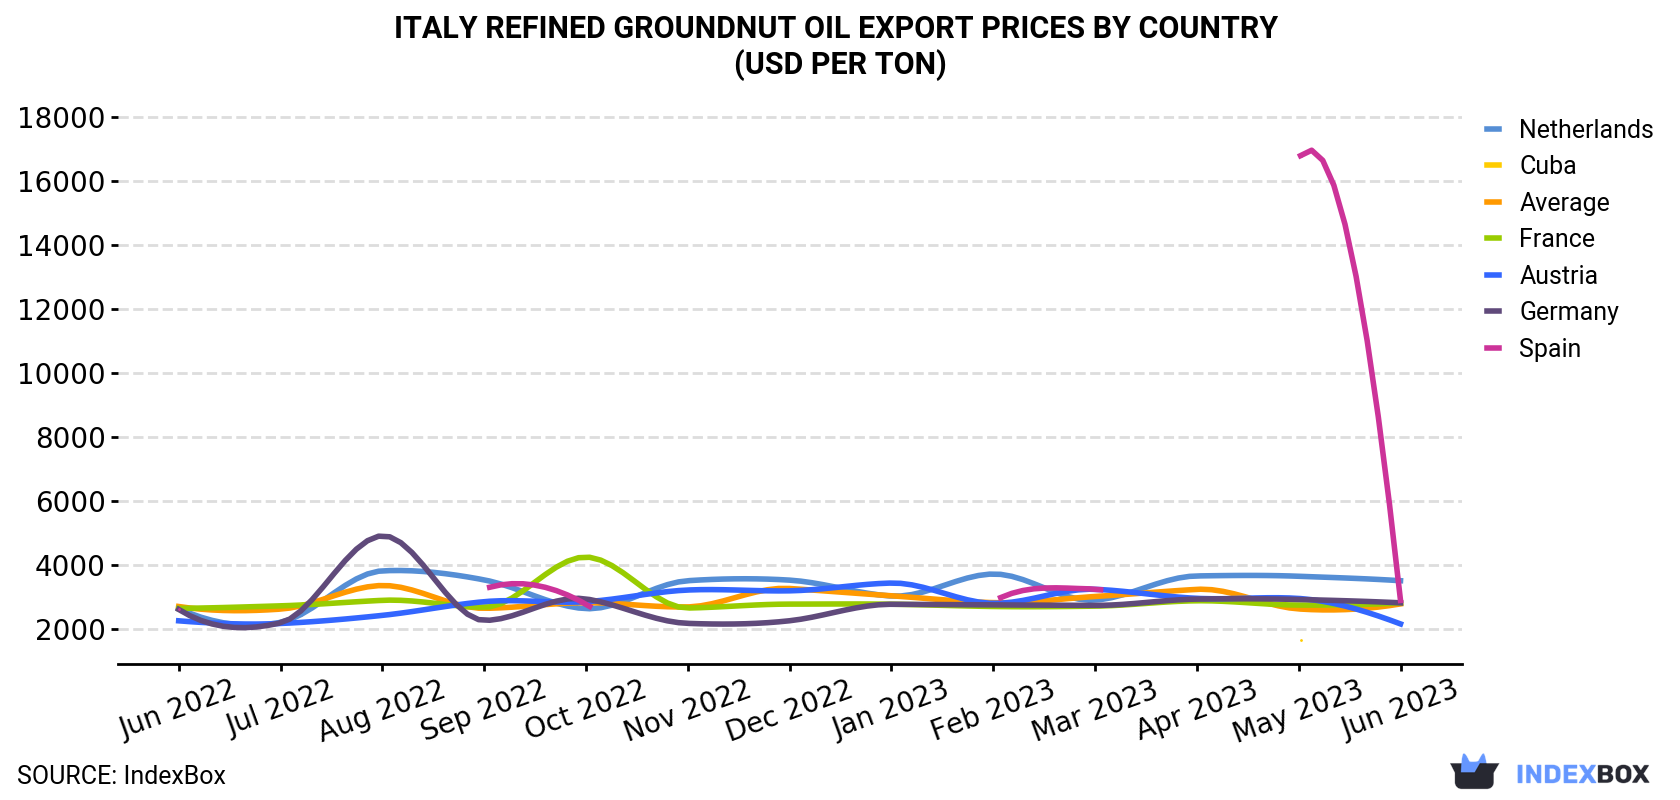 Italy Refined Groundnut Oil Export Prices By Country (USD Per Ton)